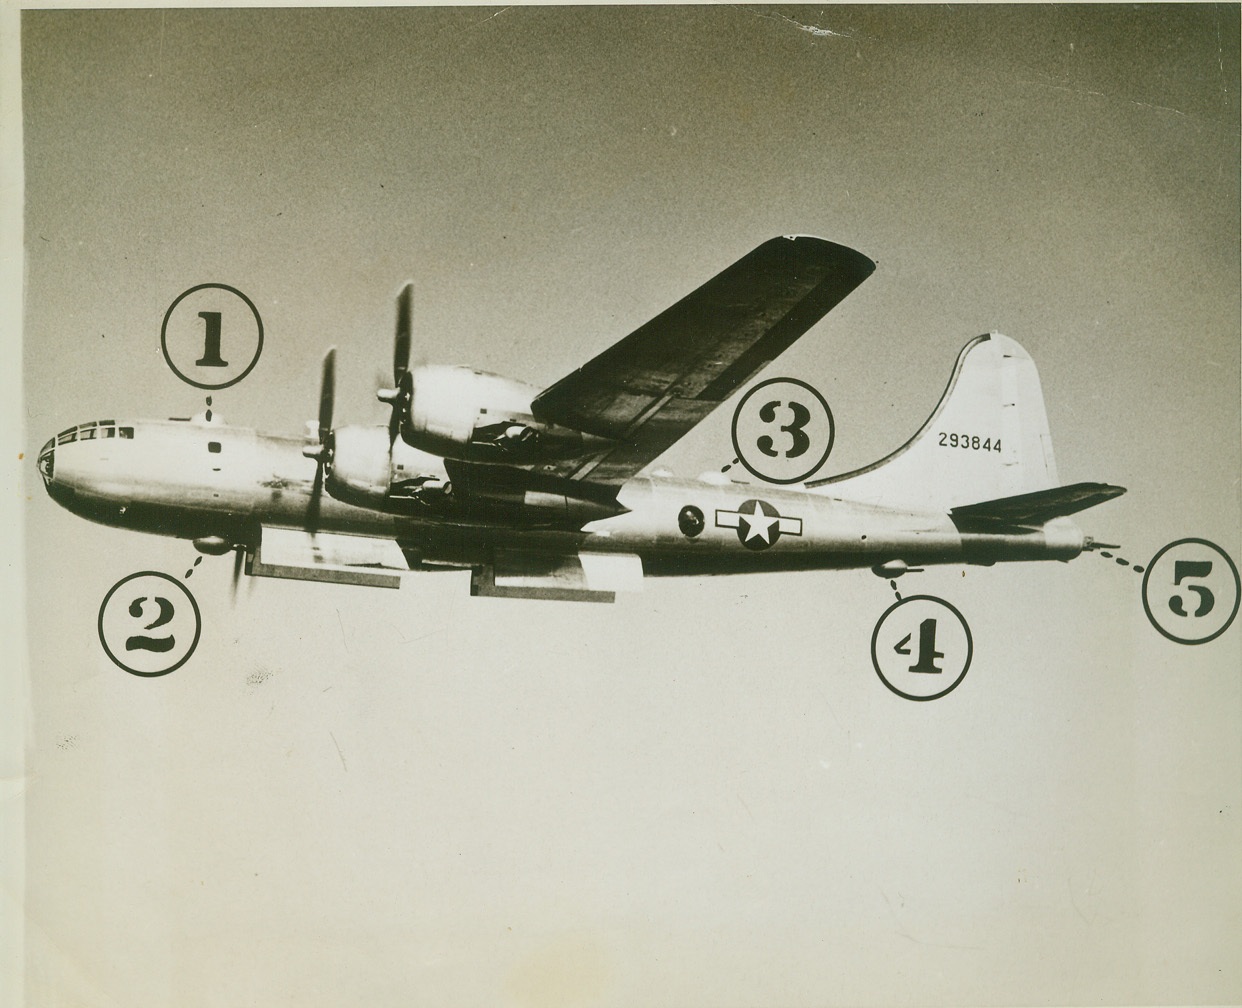 Superfortress Armament Revealed, 9/10/1944. Seattle, Wash.—Touched out of previous photographs of the B-29 Superfortress, the plane’s gun turrets are now revealed. The numbers identify the five turrets-(1) and (2) are the front upper and lower turrets; (3) and (4), the rear upper and lower; and (5) is the tail turret, which is equipped with a 20 mm cannon as well as the two .50 caliber machine guns which are found in all the turrets. All armament is fired by remote control. Credit: ACME;